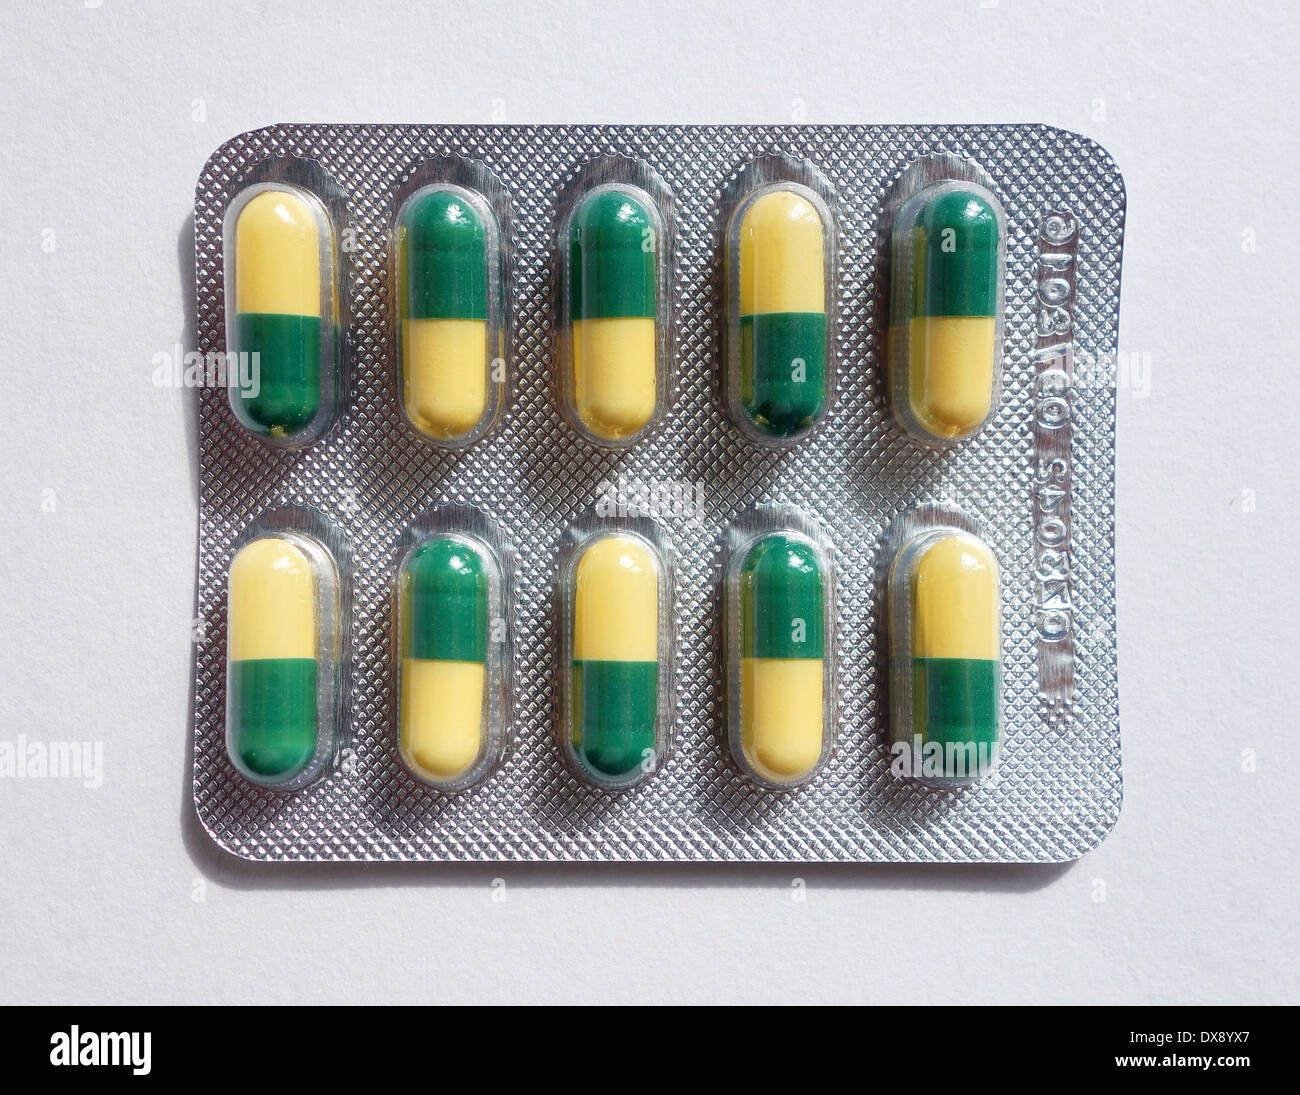 Tramadol High Resolution Stock Photography And Images Alamy